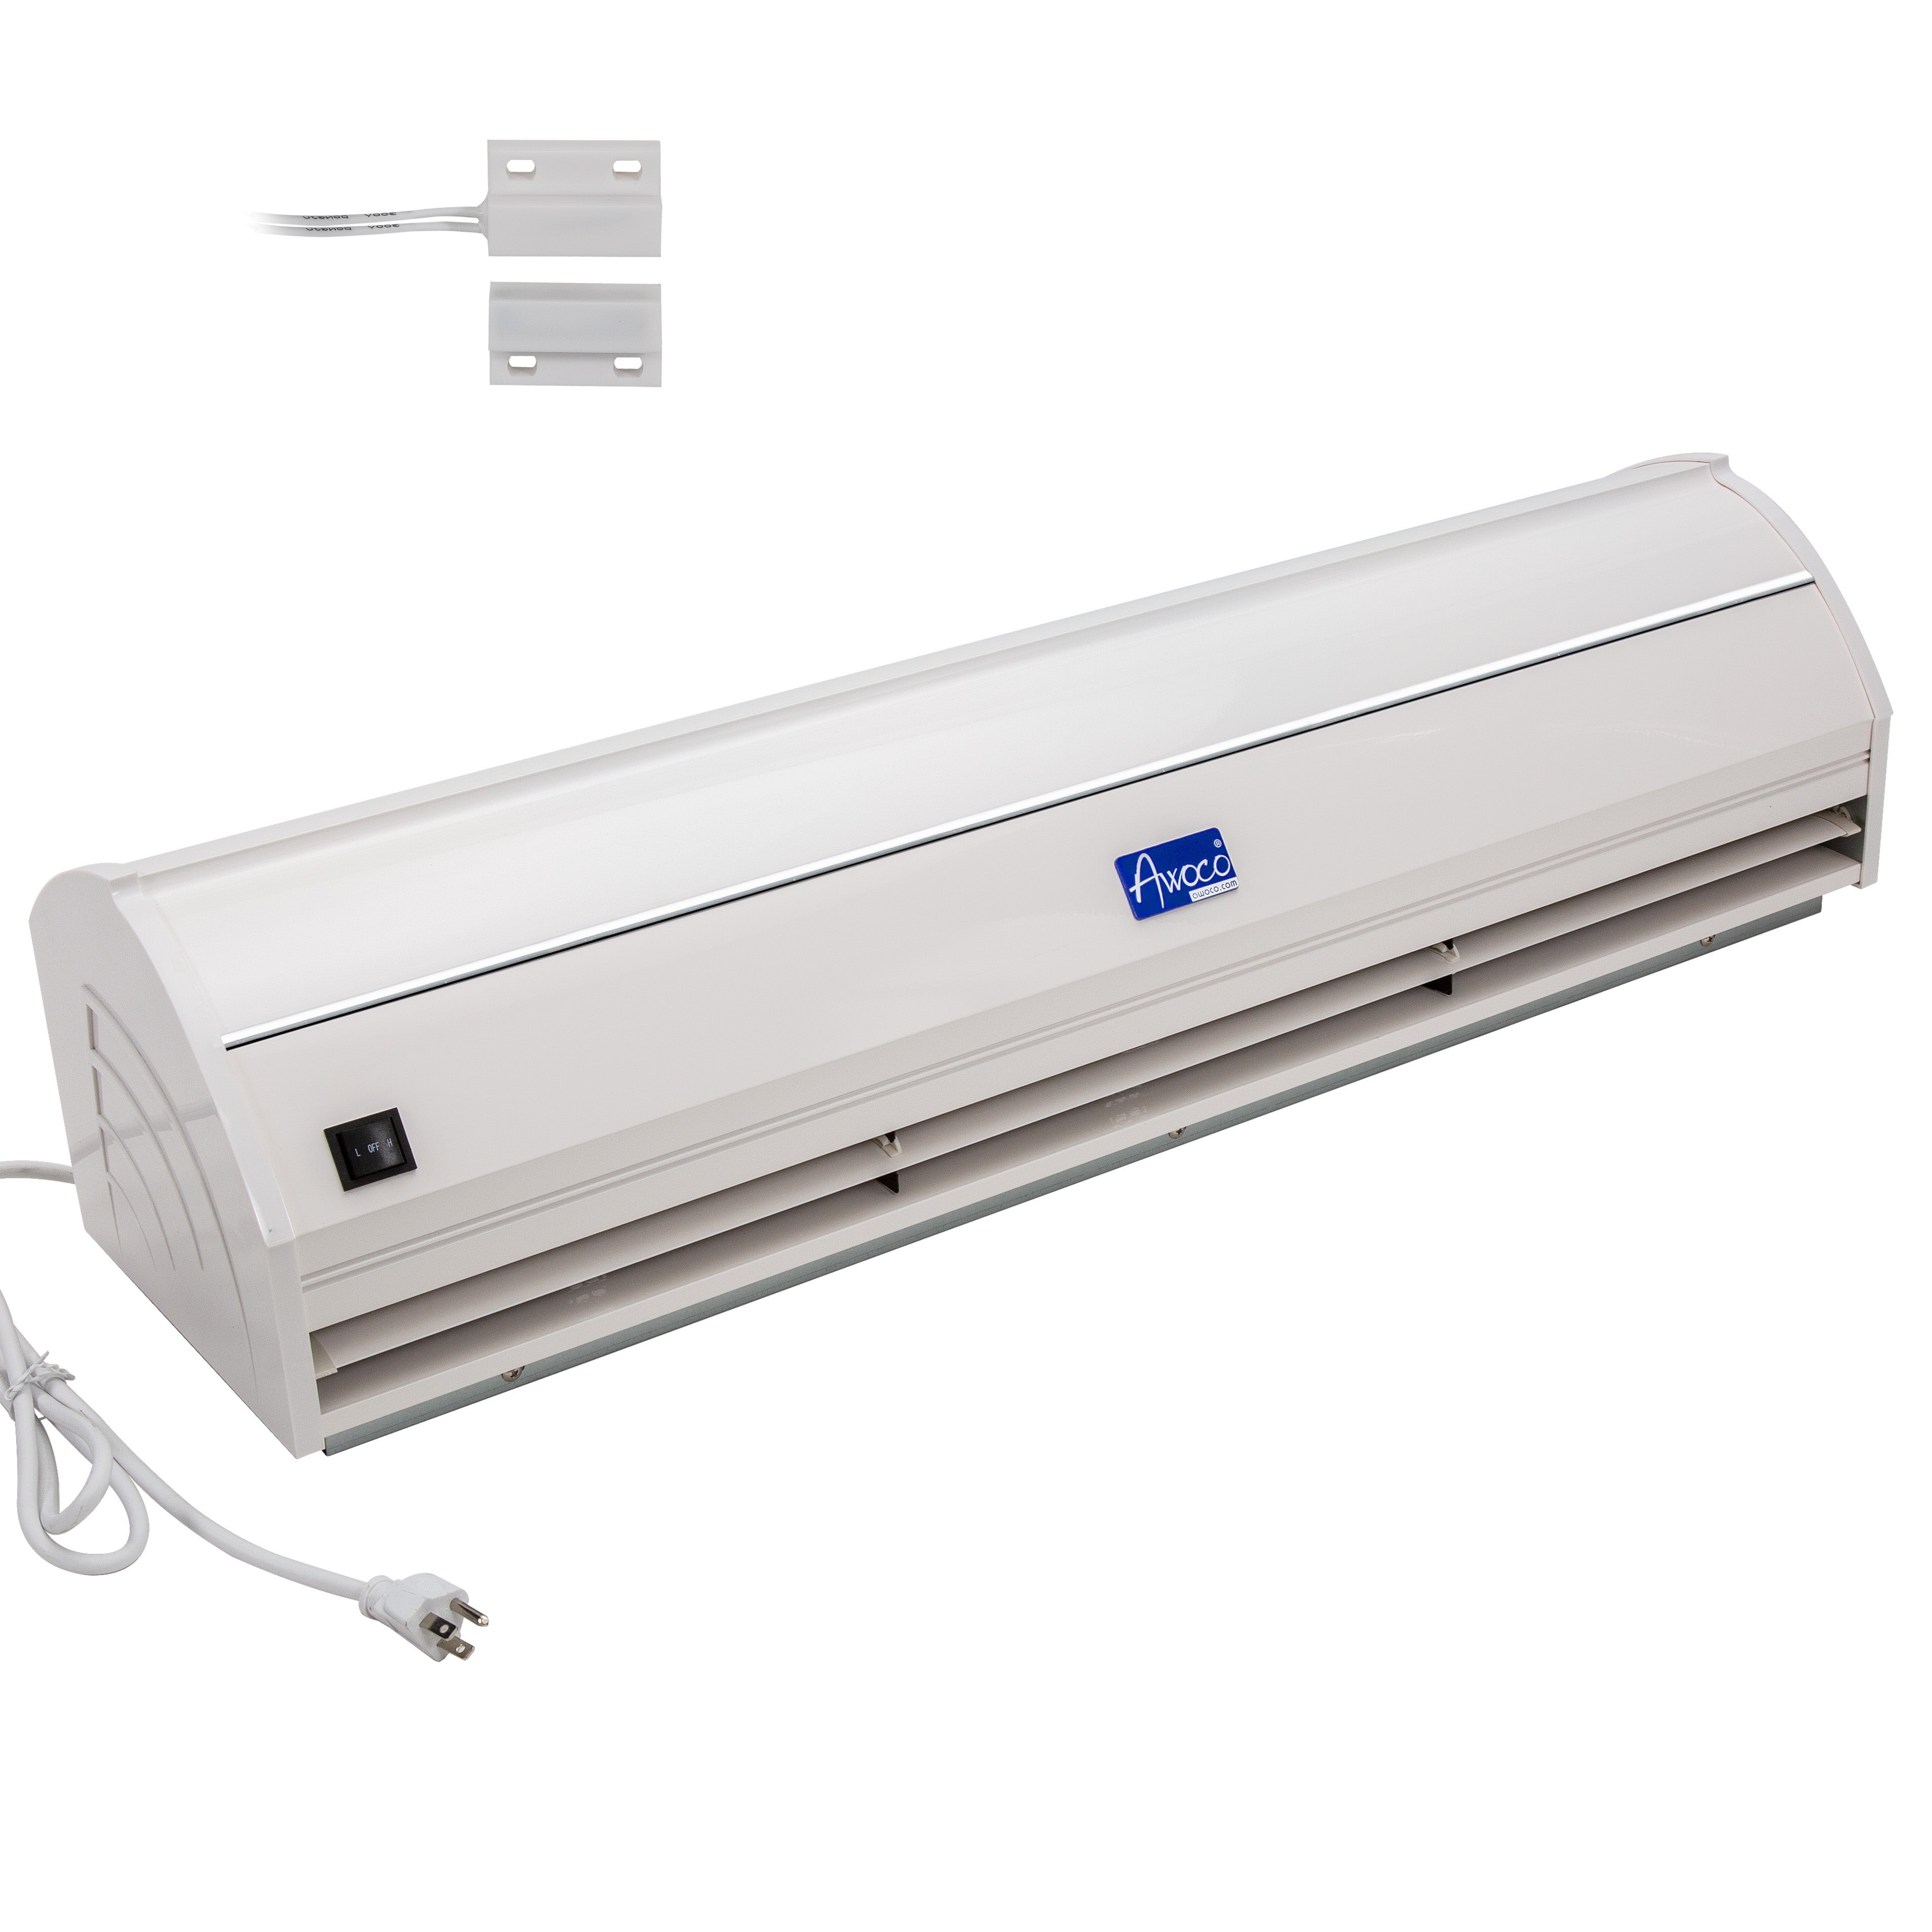 [USED] Awoco AC23-J90 72" Elegant 2 Speeds 1800 CFM Indoor Air Curtain, CE Certified, 120V Unheated with an Easy-Install Magnetic Door Switch